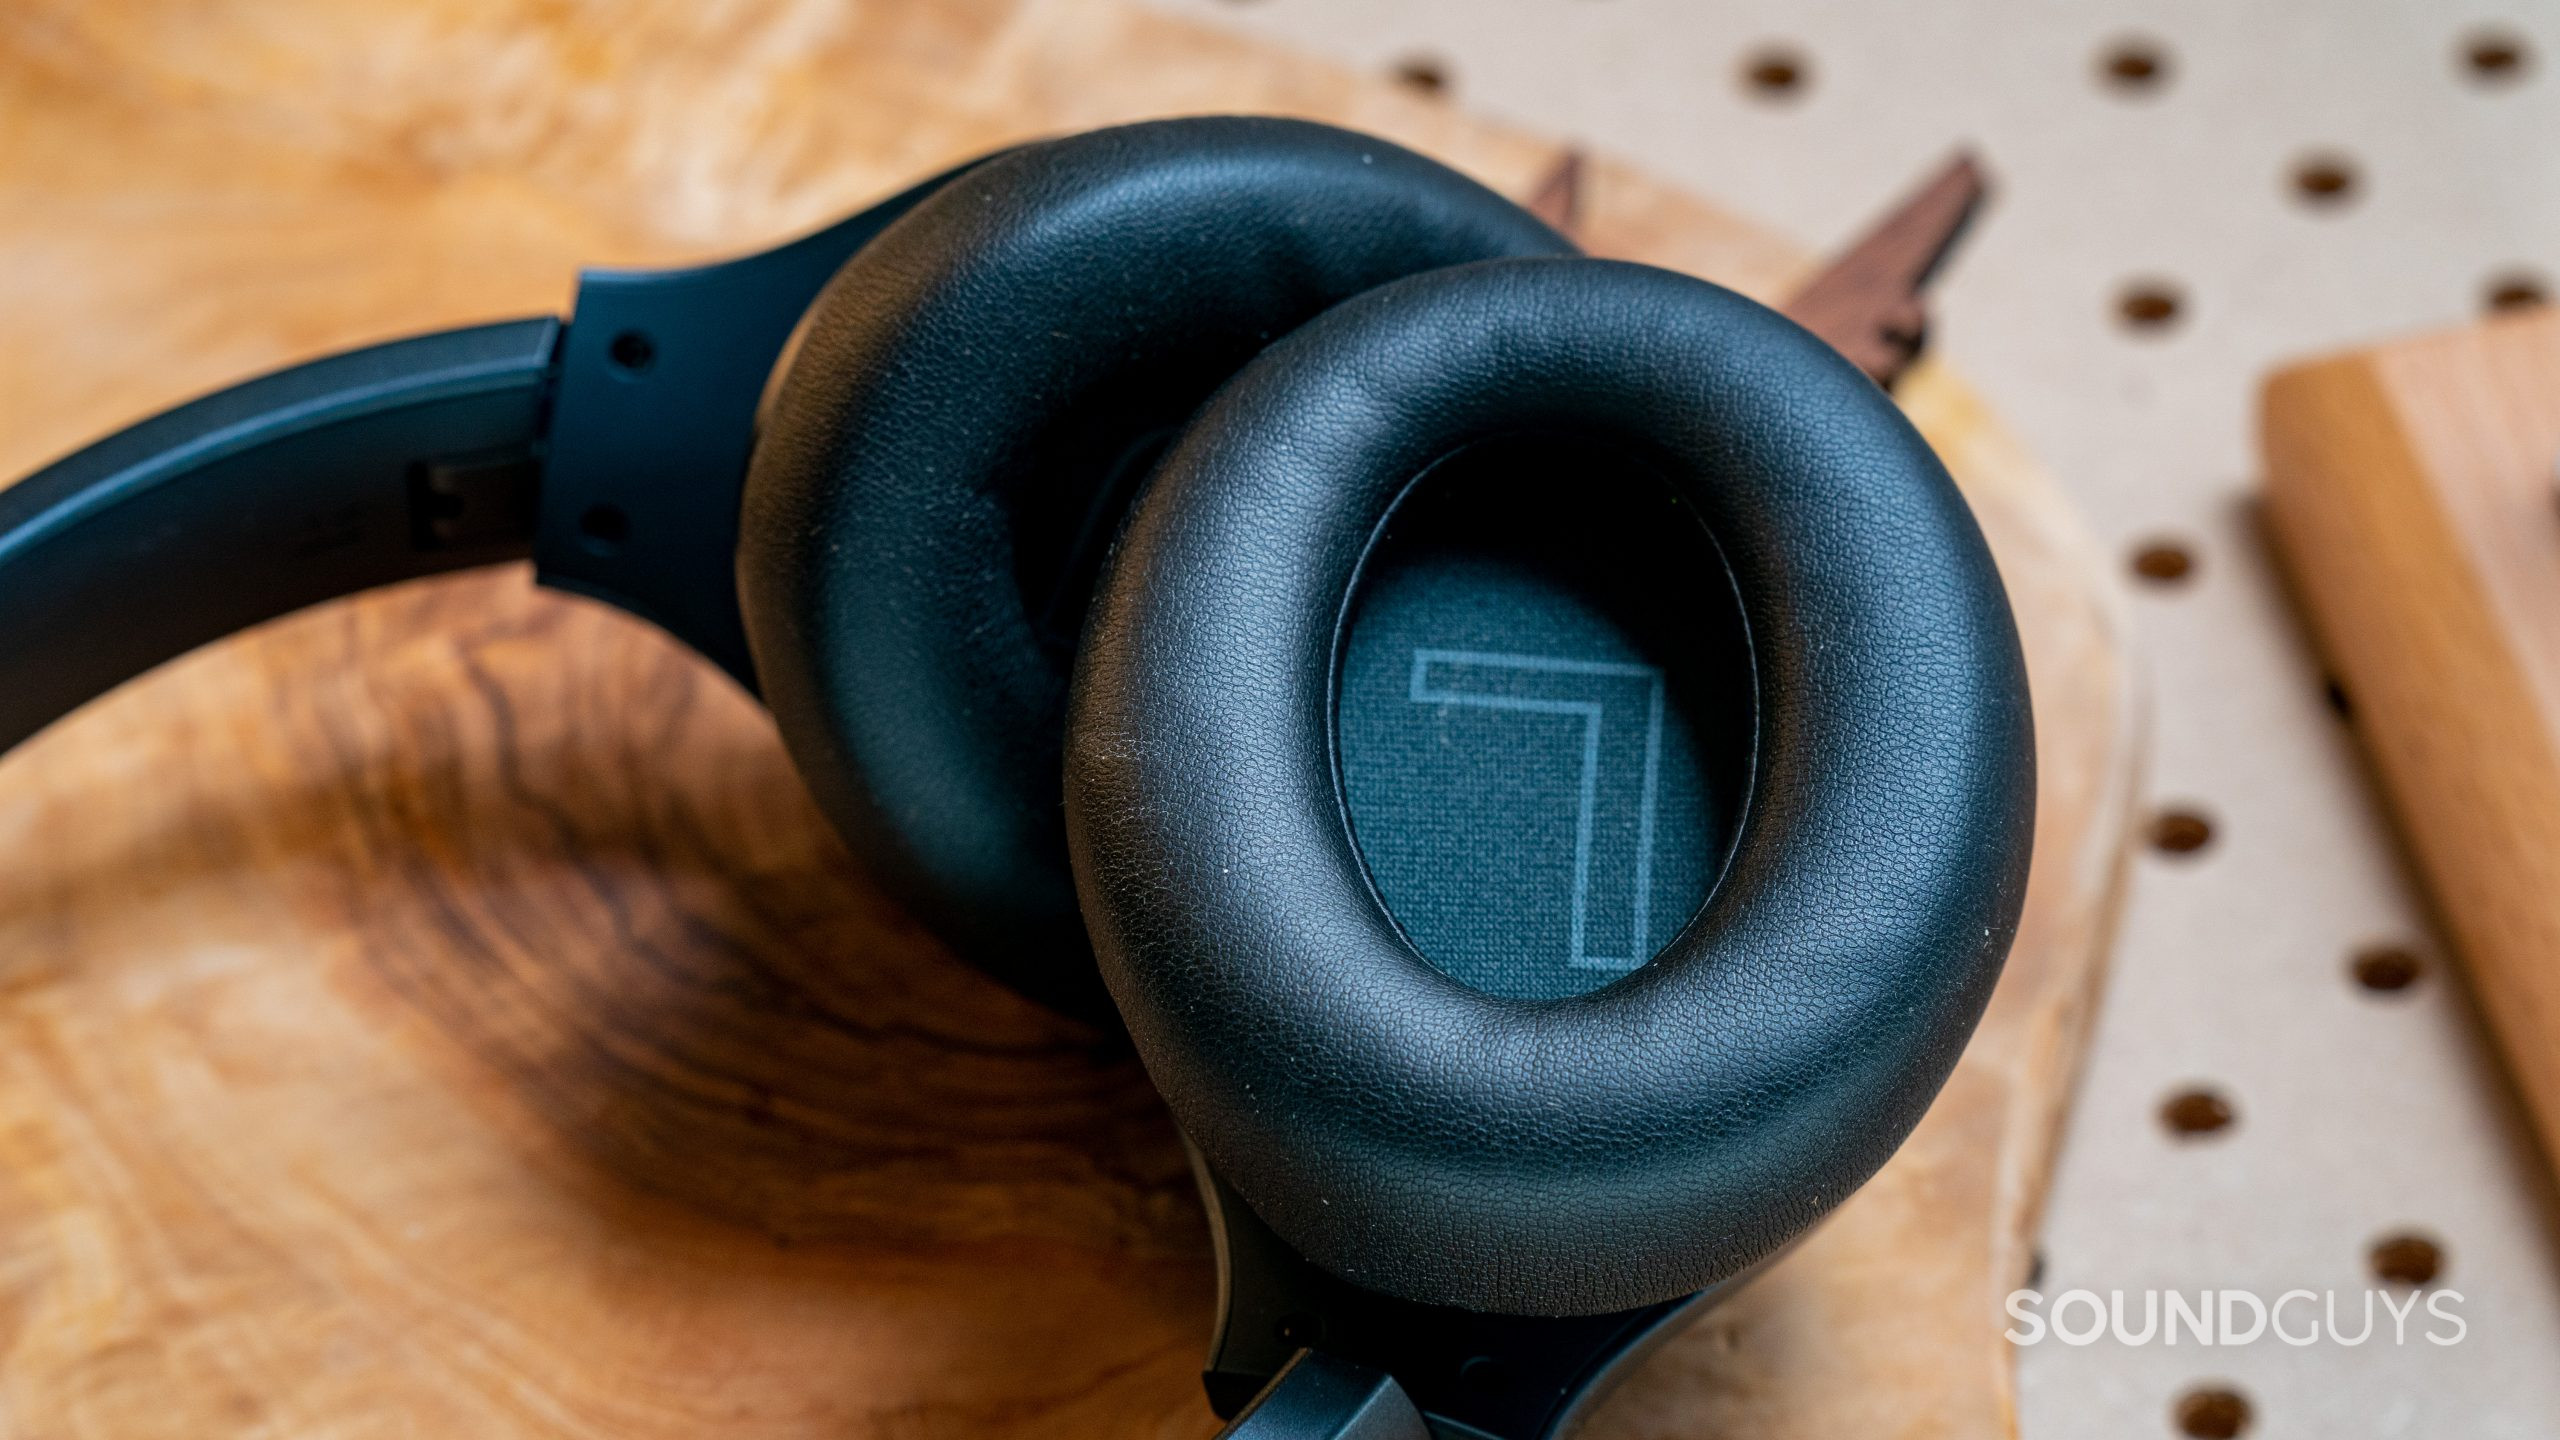 The Anker Soundcore Life Q20 wireless noise canceling headphones ear pads with the left and right headphone labelled.